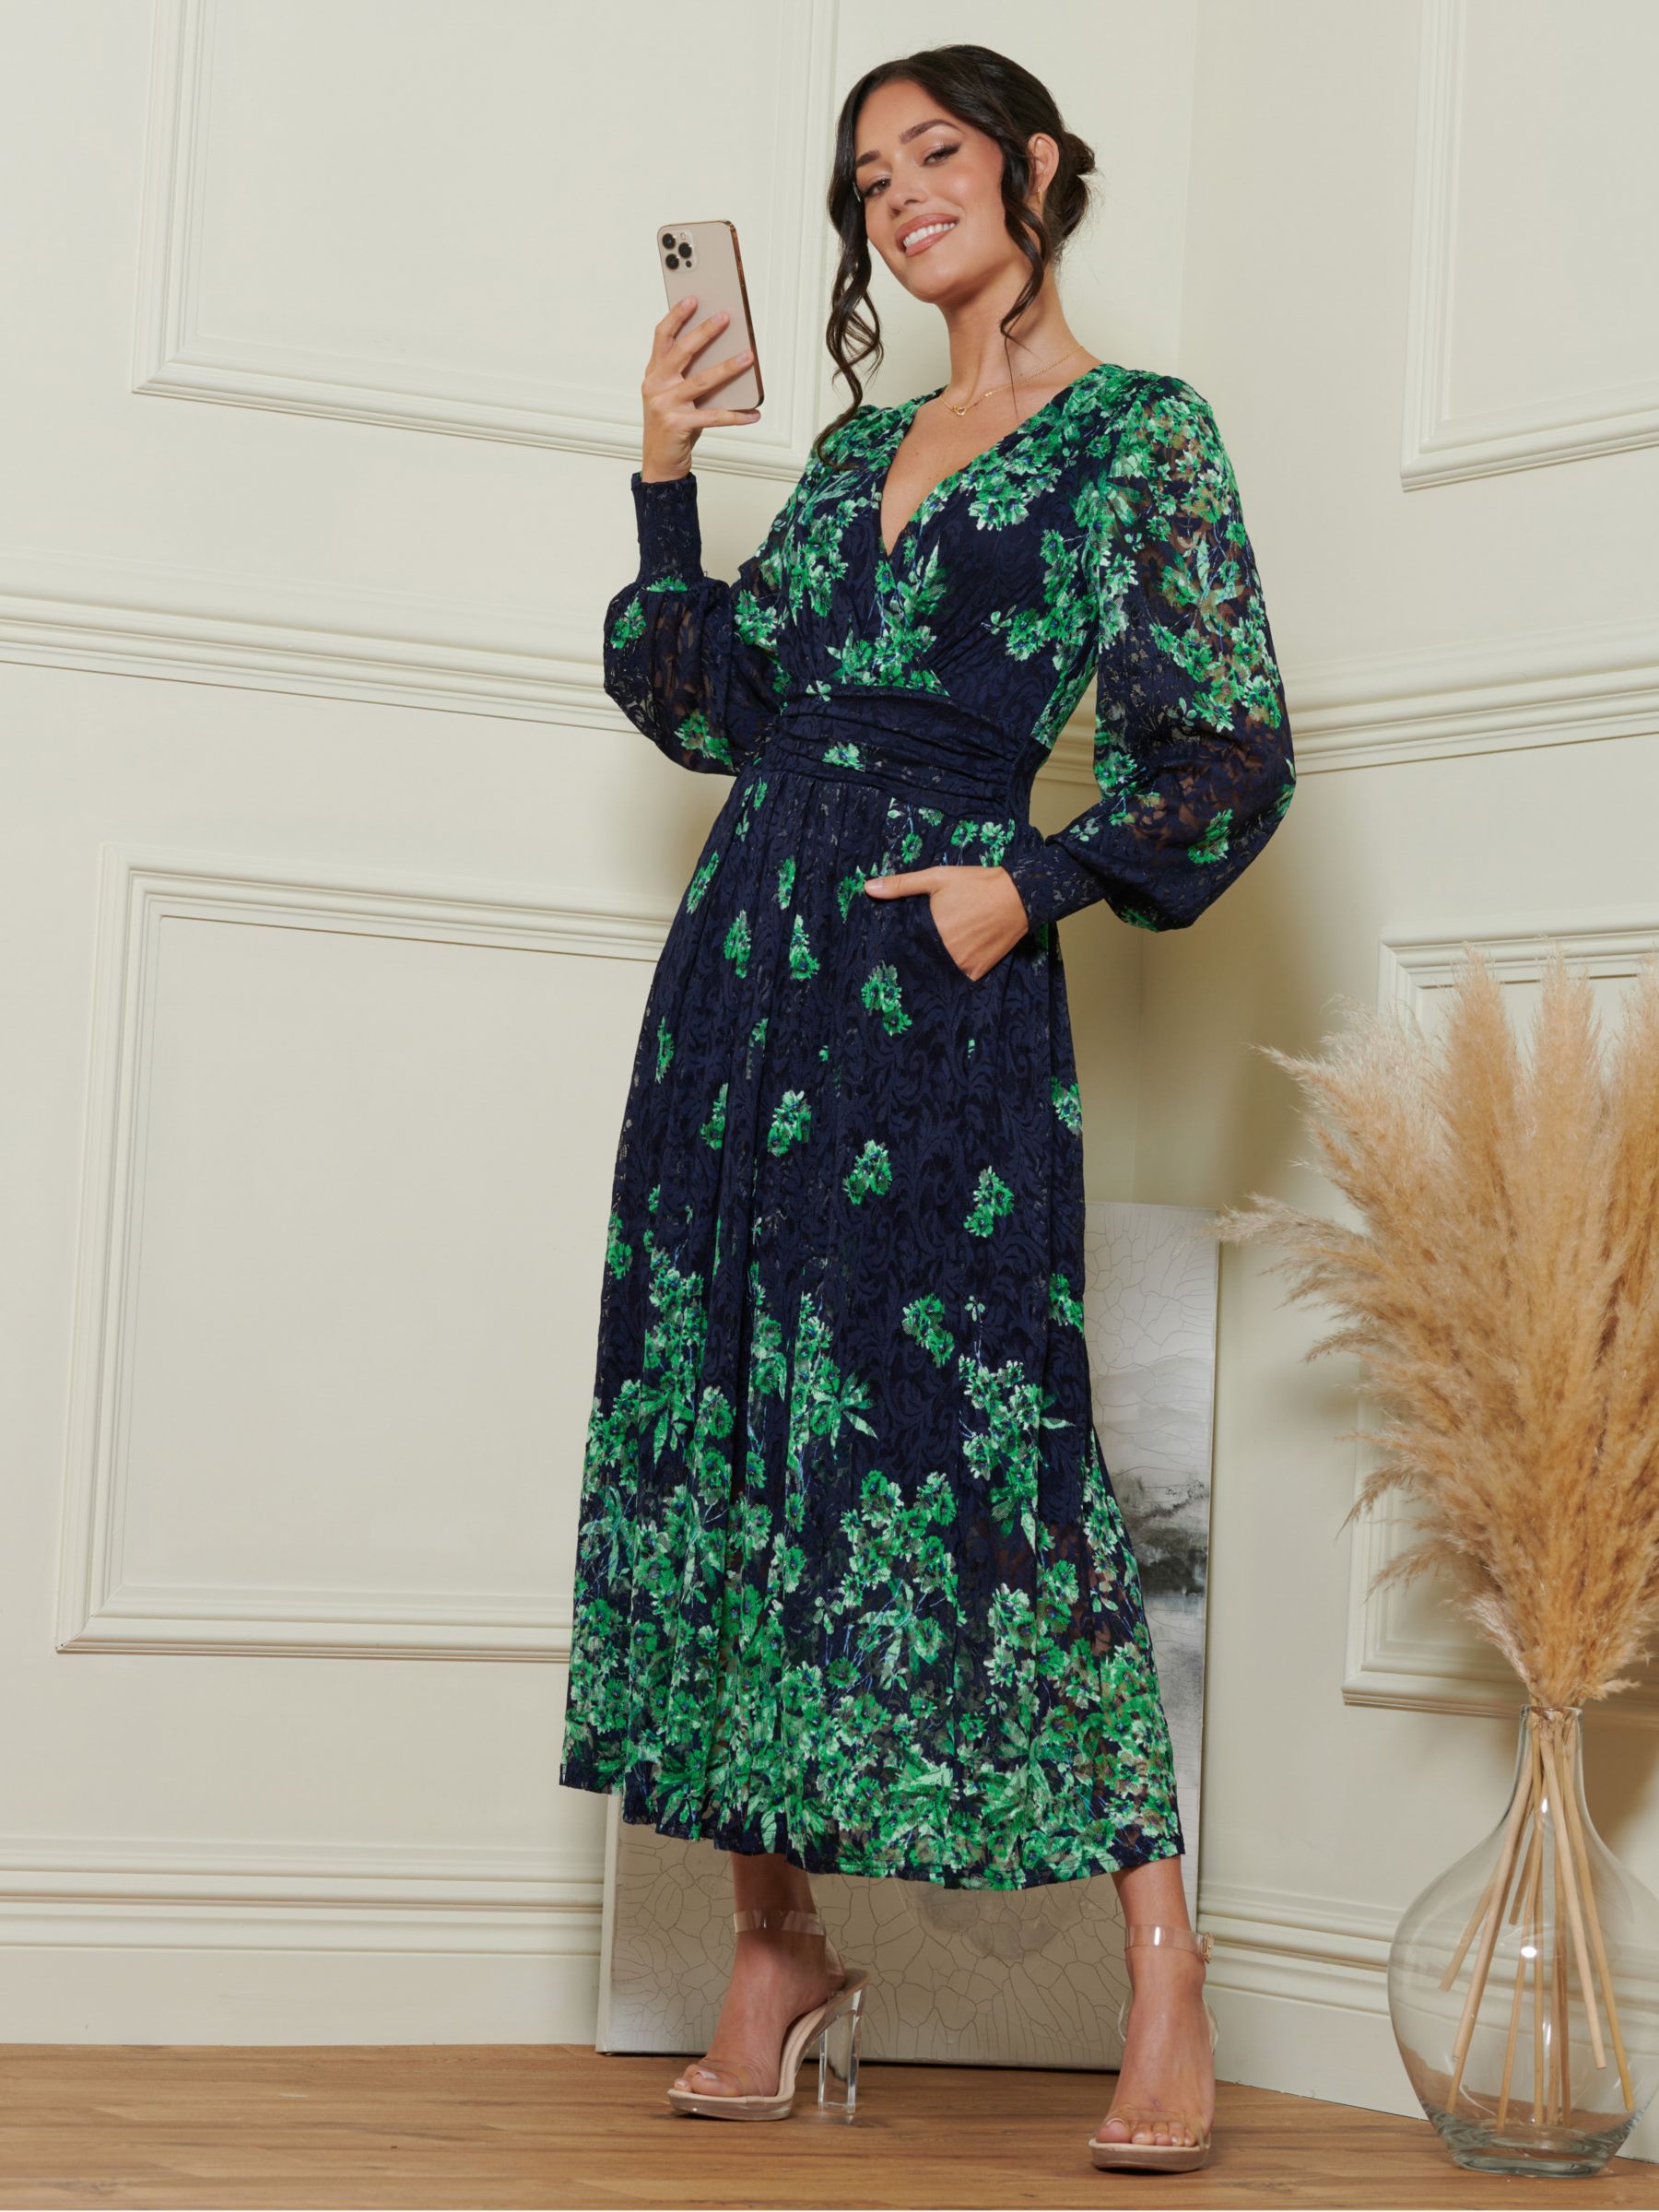 Buy Jolie Moi Amica Lace Floral Maxi Dress, Green/Multi Online at johnlewis.com